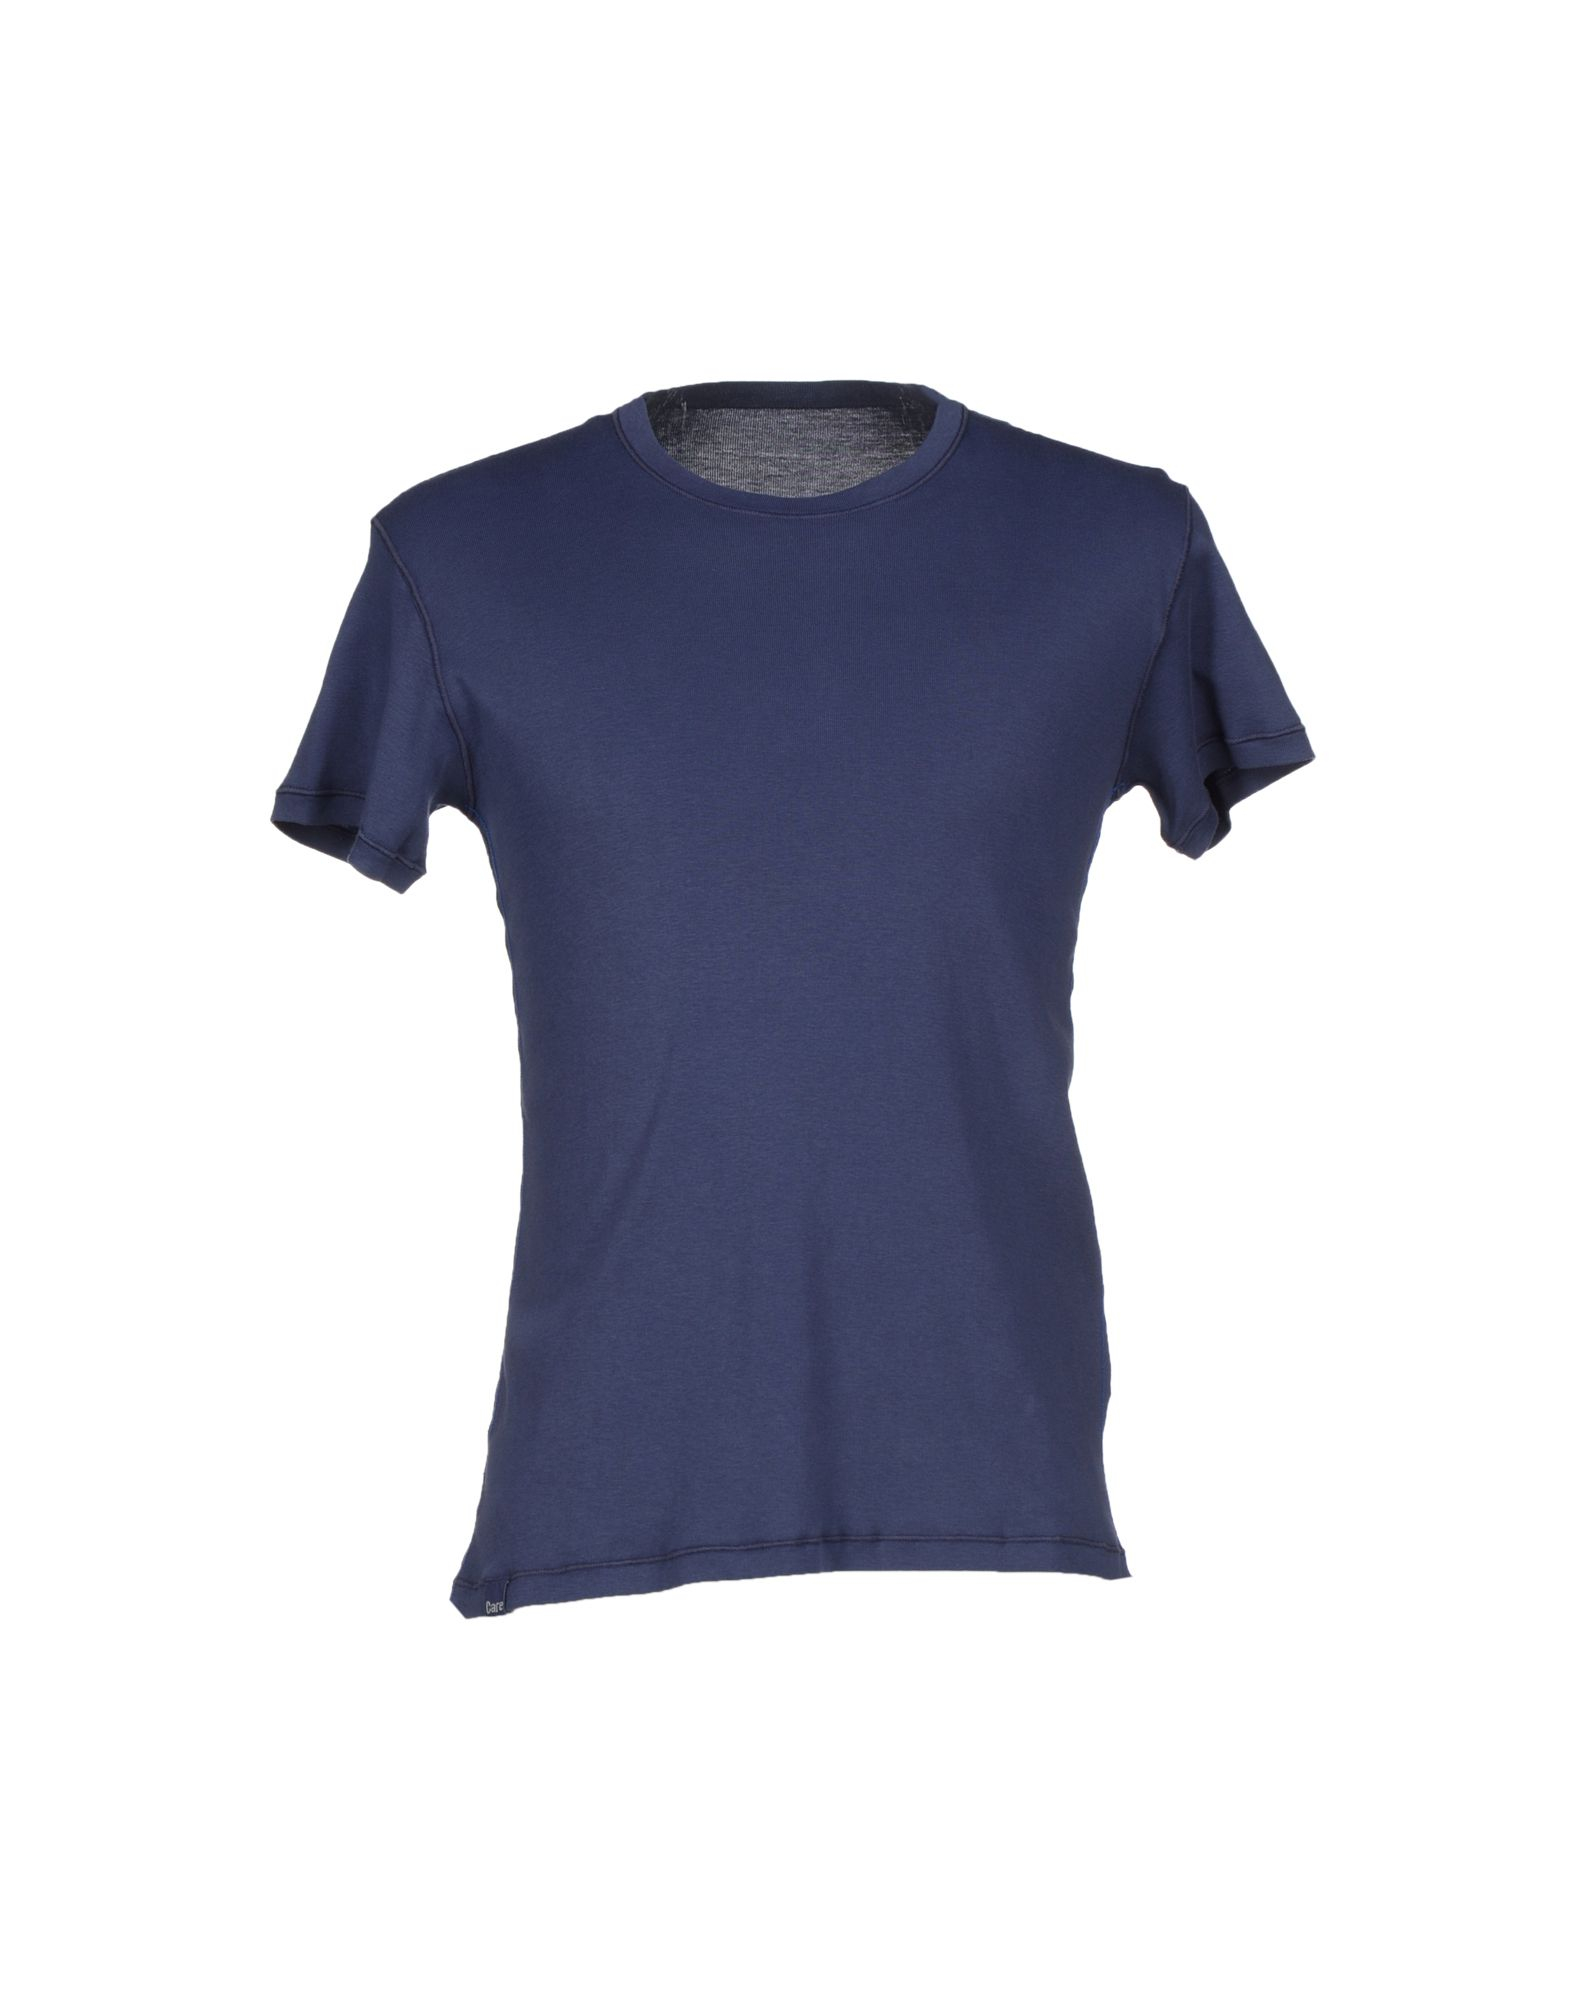 Lyst - Care label T-shirt in Blue for Men